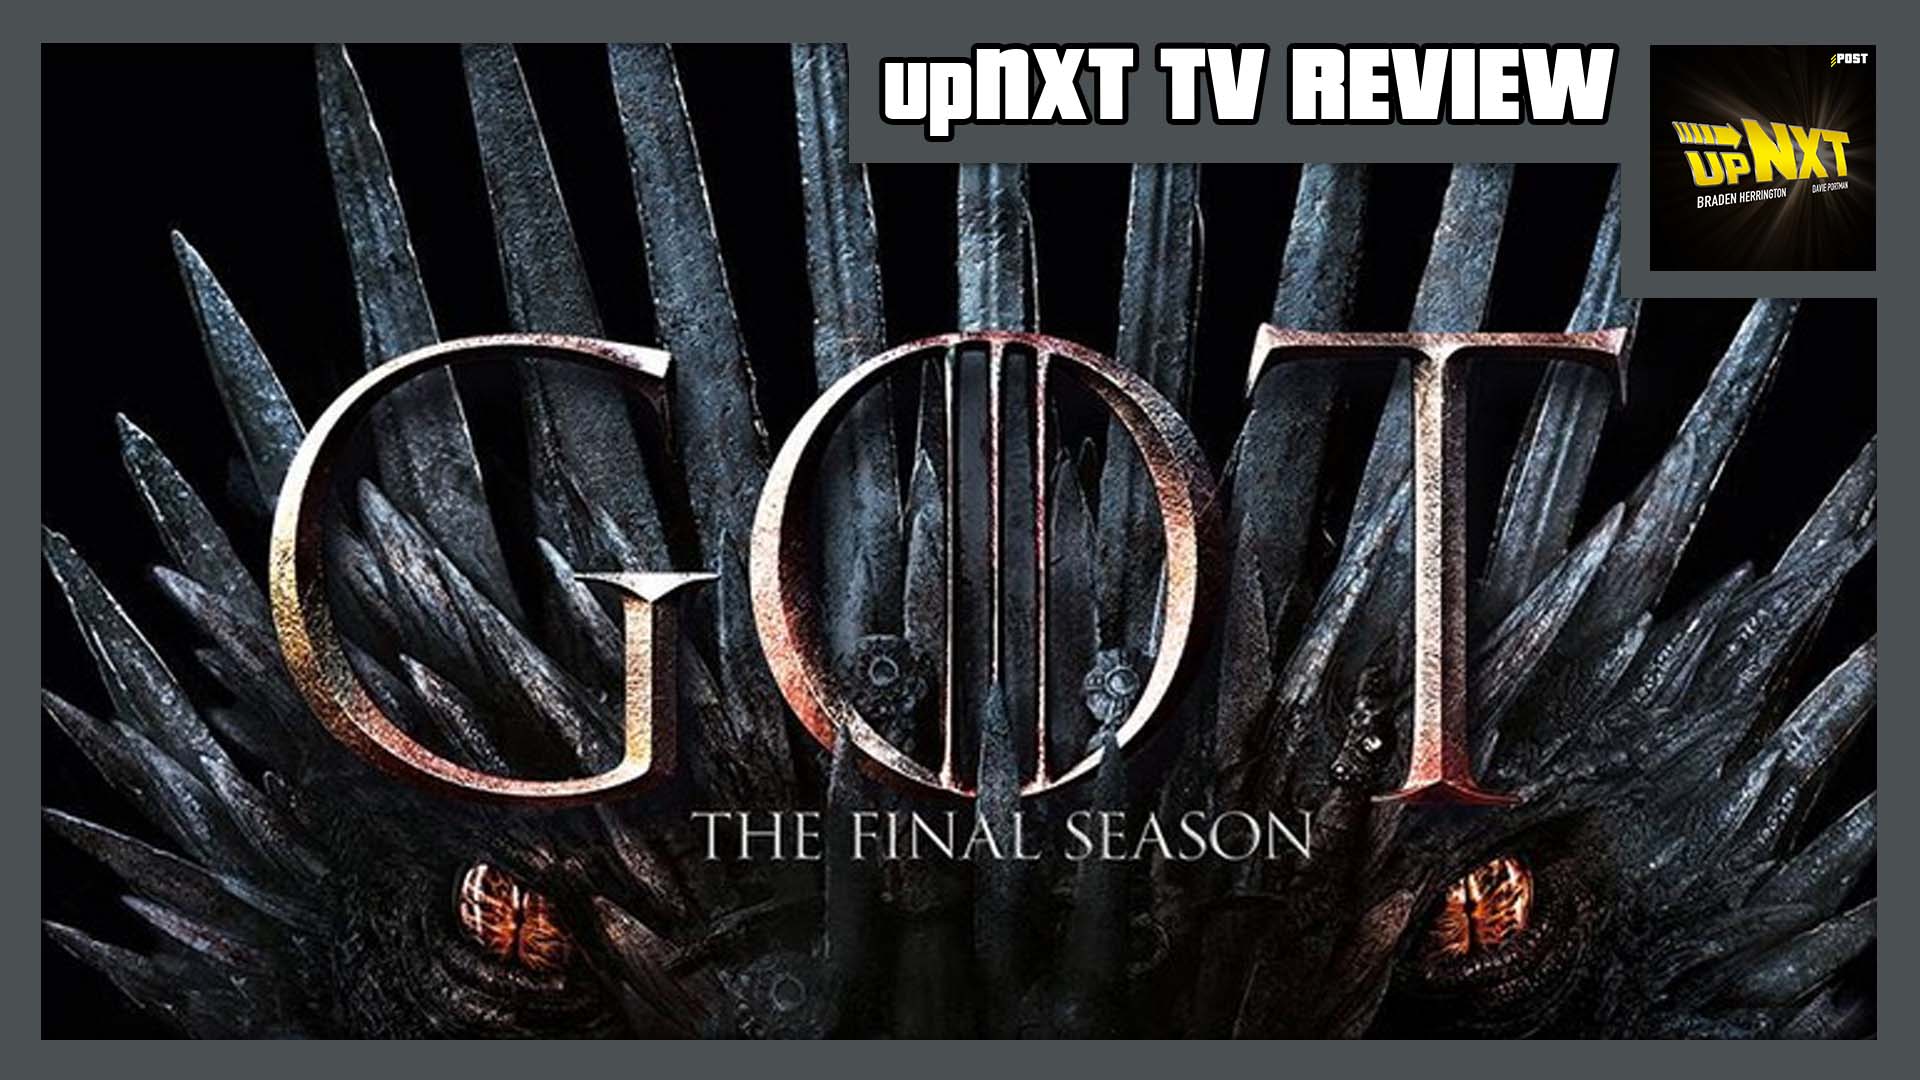 upNXT TV REVIEW – Game of Thrones Series Finale “The Iron Throne”